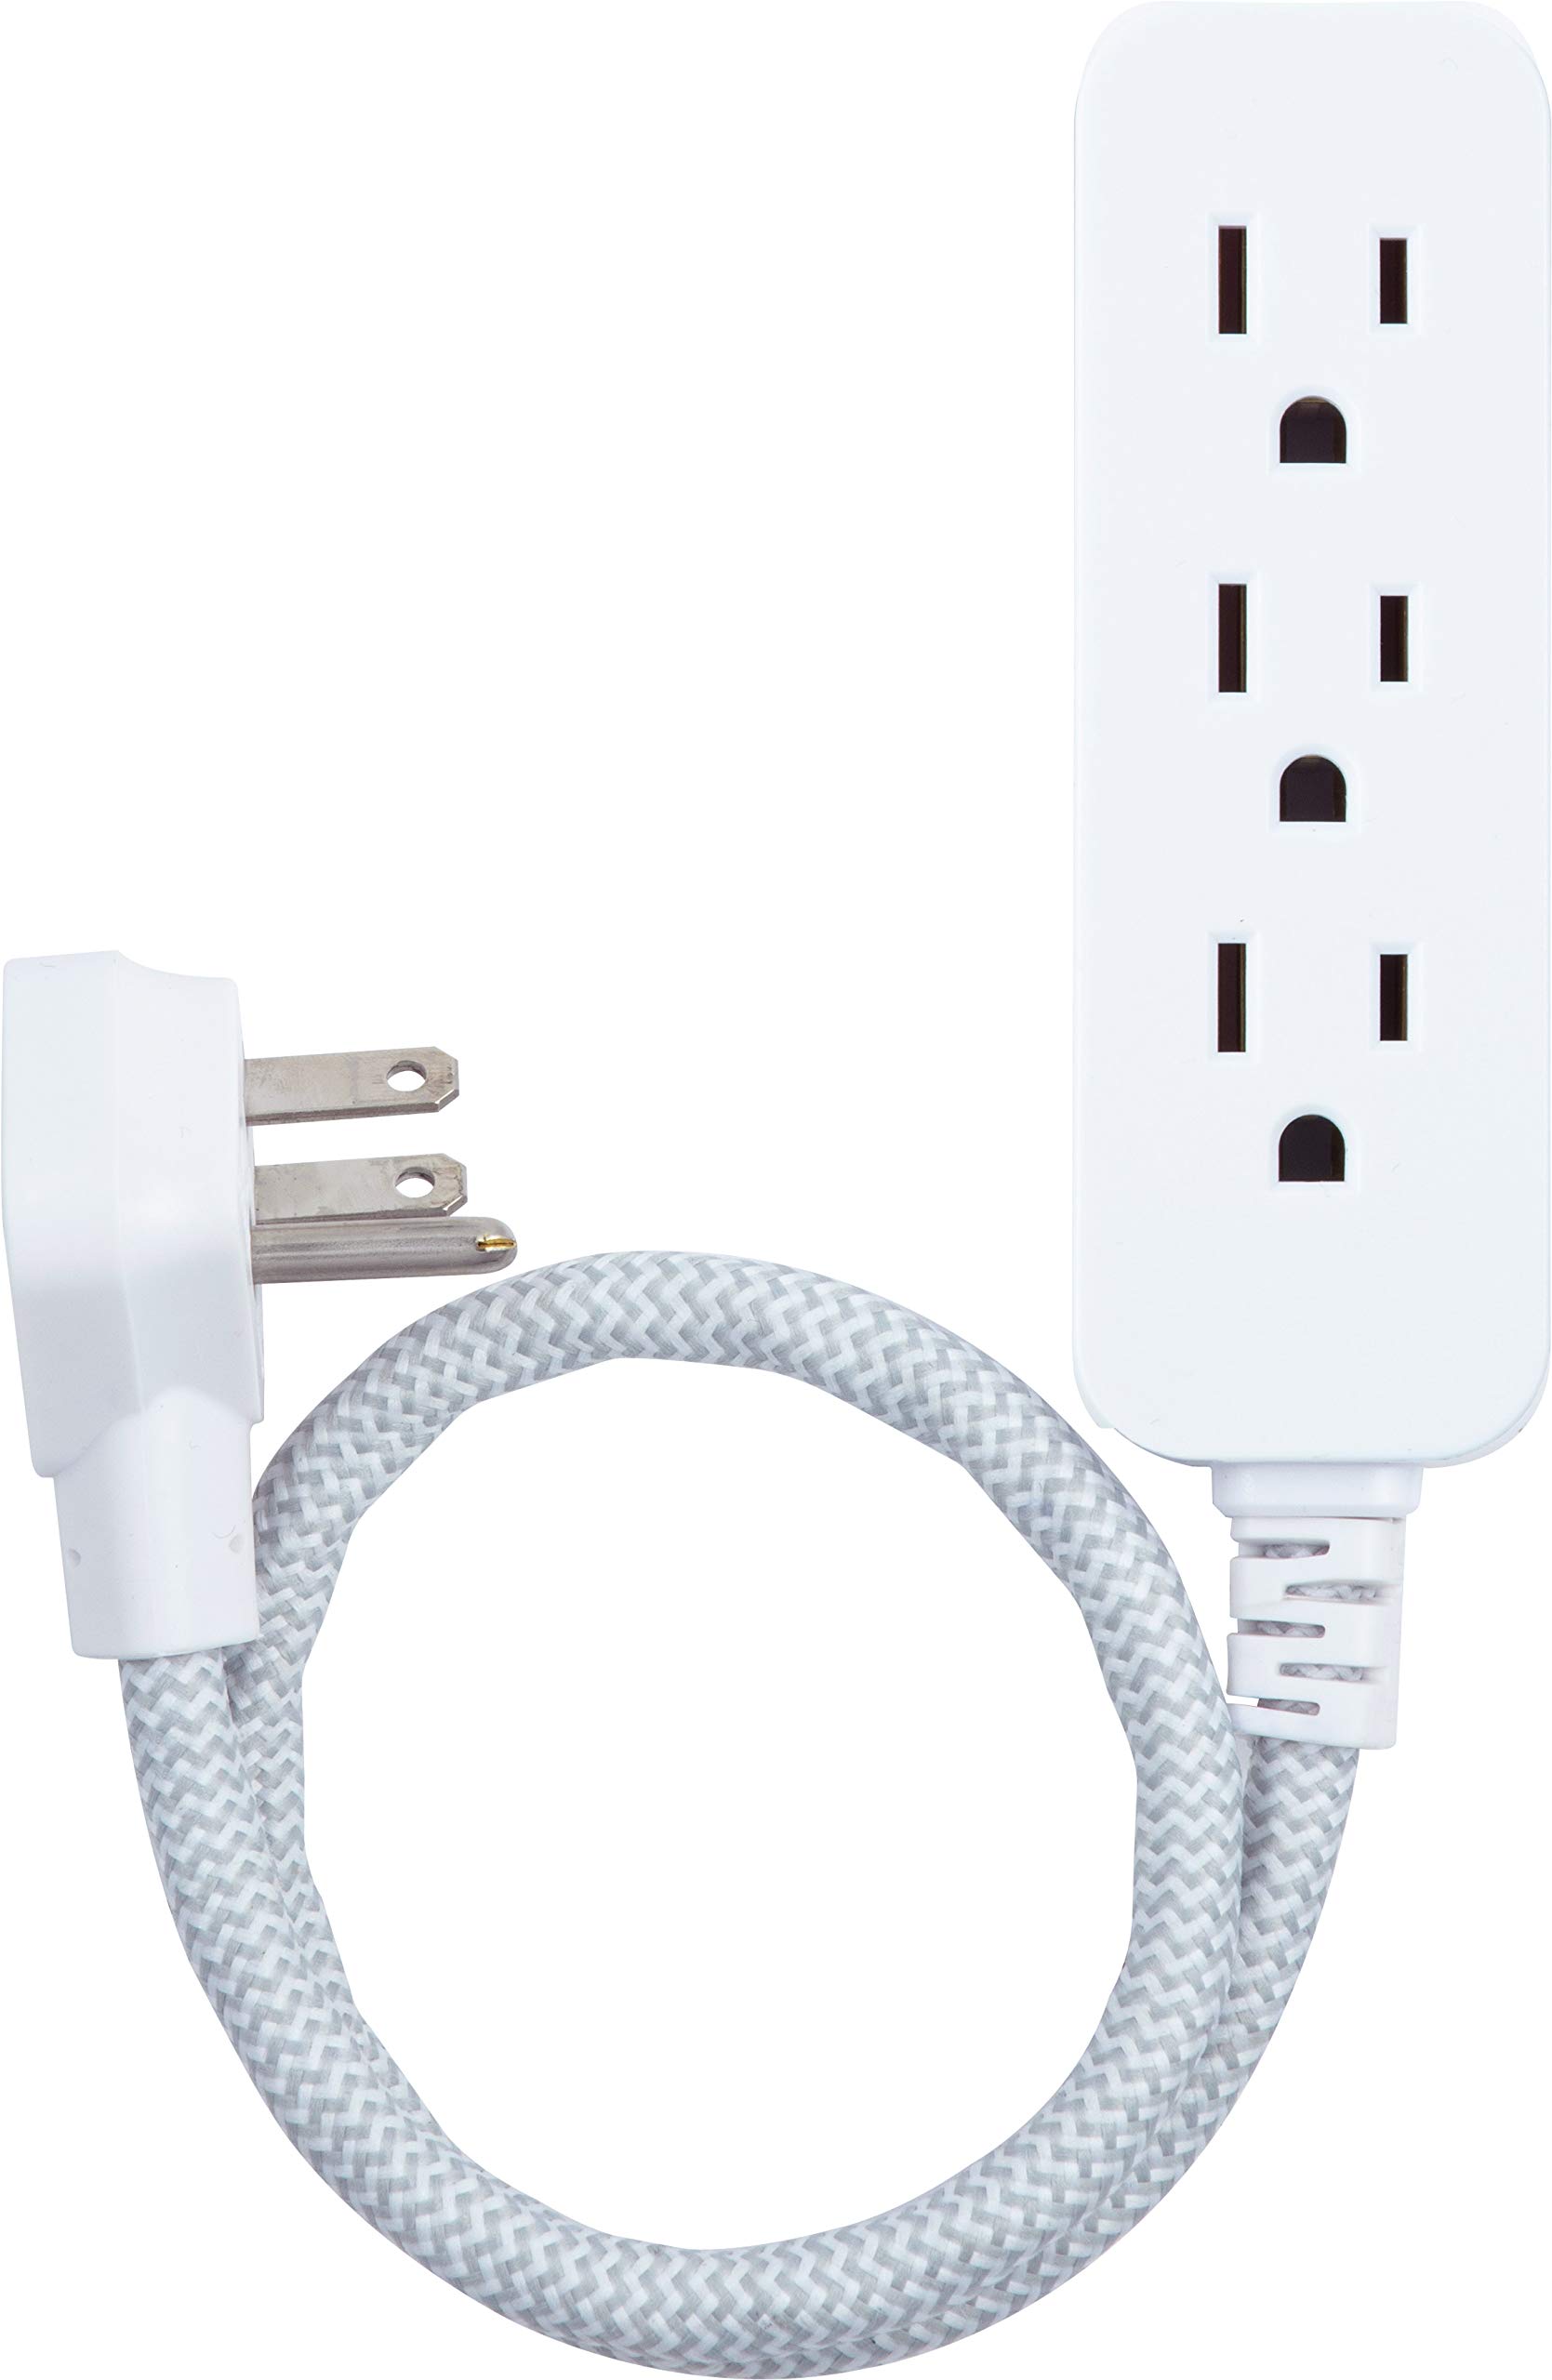 GE Power Strip Surge Protector, 6 Outlets, Flat Plug, 2ft Power Cord, Wall Mount, White, 40532 & Designer 1 Ft. Power Strip, 3 Grounded Outlets, Flat Plug, Mini Cord, Premium, White, 45190